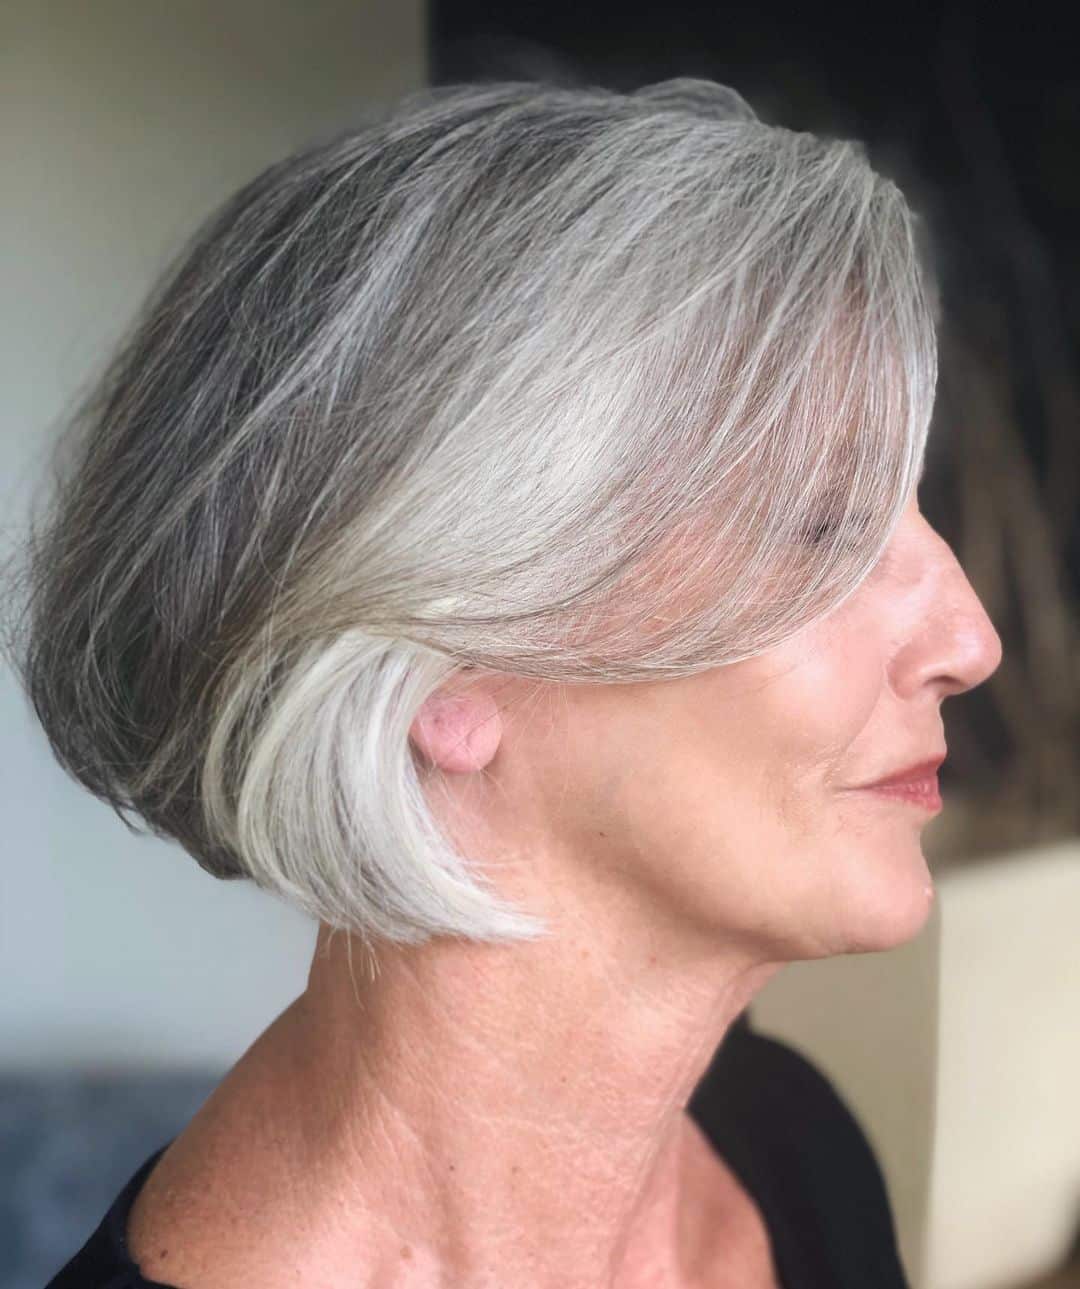 The 5 Best Youthful Hairstyles and Haircuts for Older Women